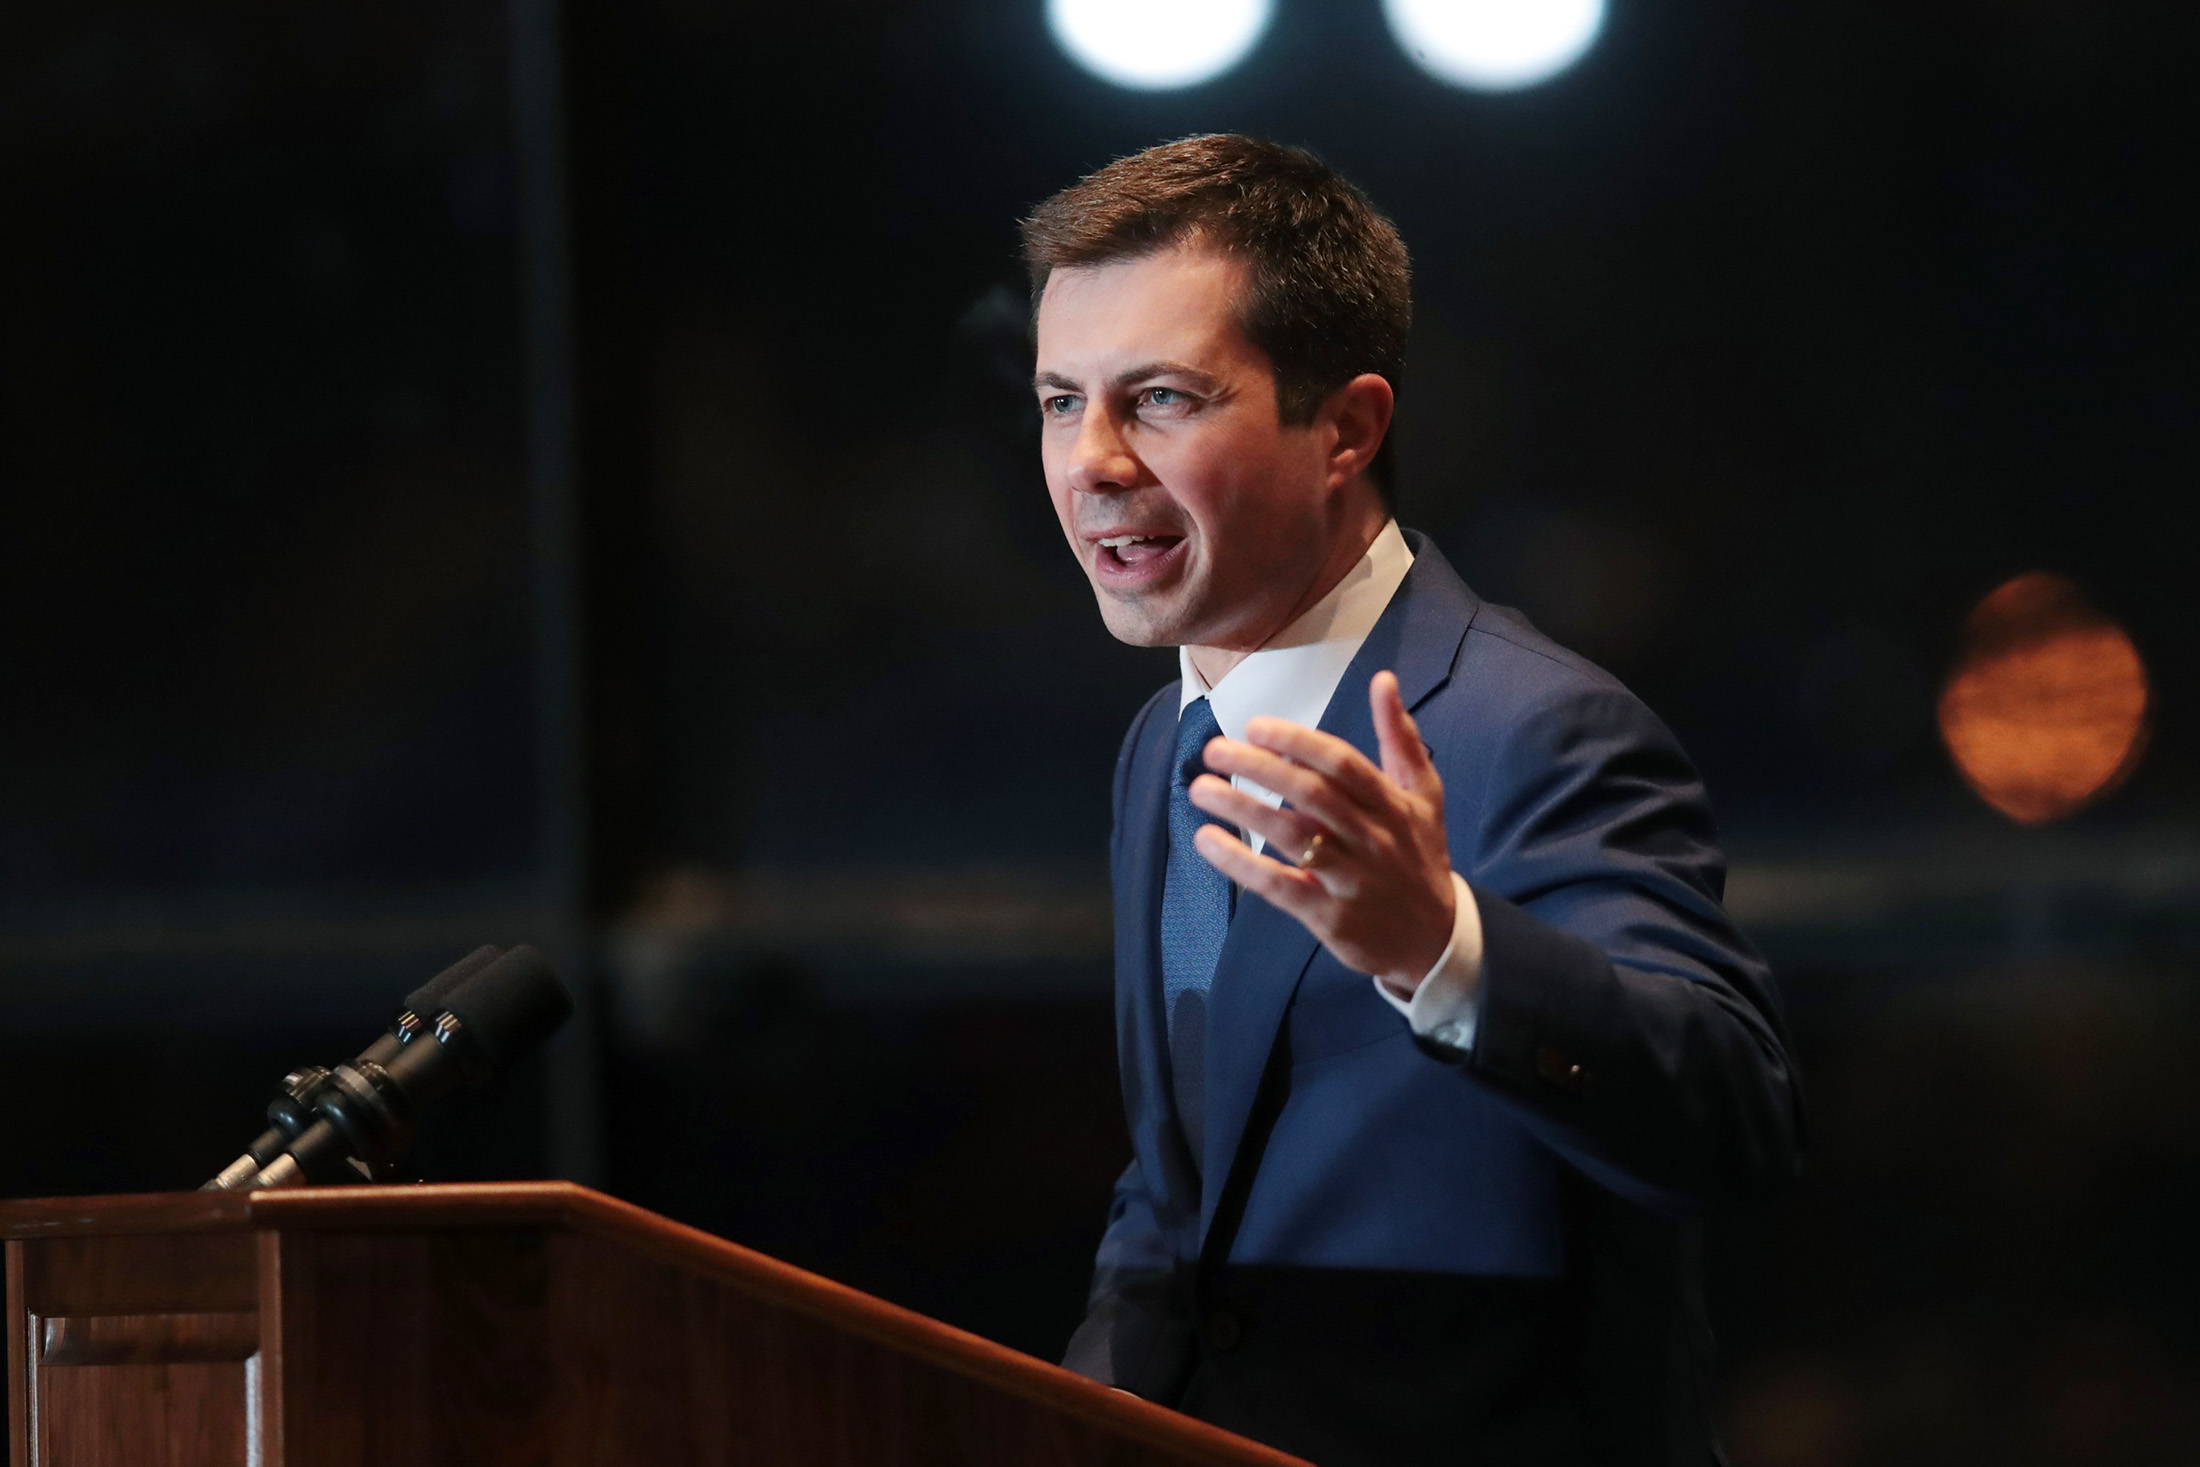 Mayor Pete Buttigieg announced ending his campaign to be the Democratic nominee for president during a speech in South Bend, Indiana, on March 1. 